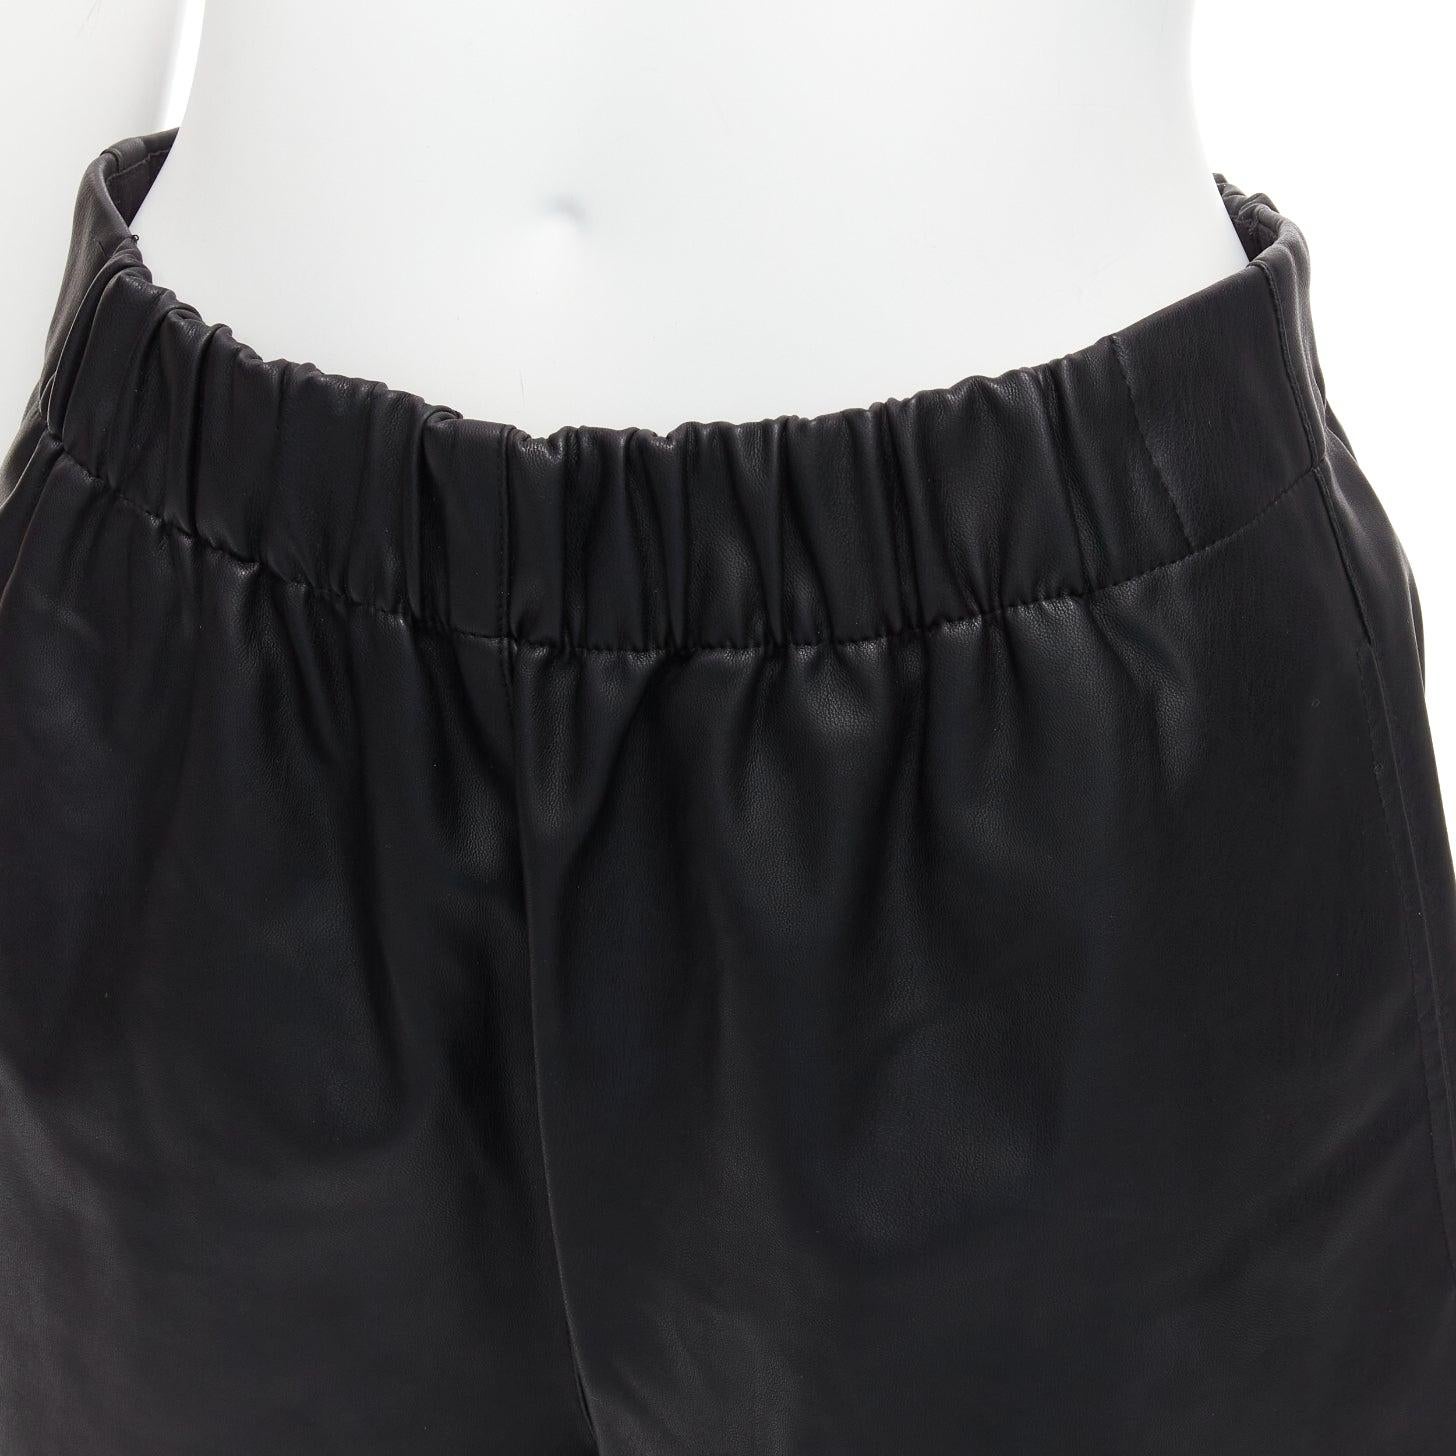 TIBI black vegan leather elasticated waist pocketed mini shorts XS
Reference: MAFK/A00018
Brand: Tibi
Material: Polyester
Color: Black
Pattern: Solid
Closure: Elasticated
Lining: Black Fabric
Made in: China

CONDITION:
Condition: Excellent, this